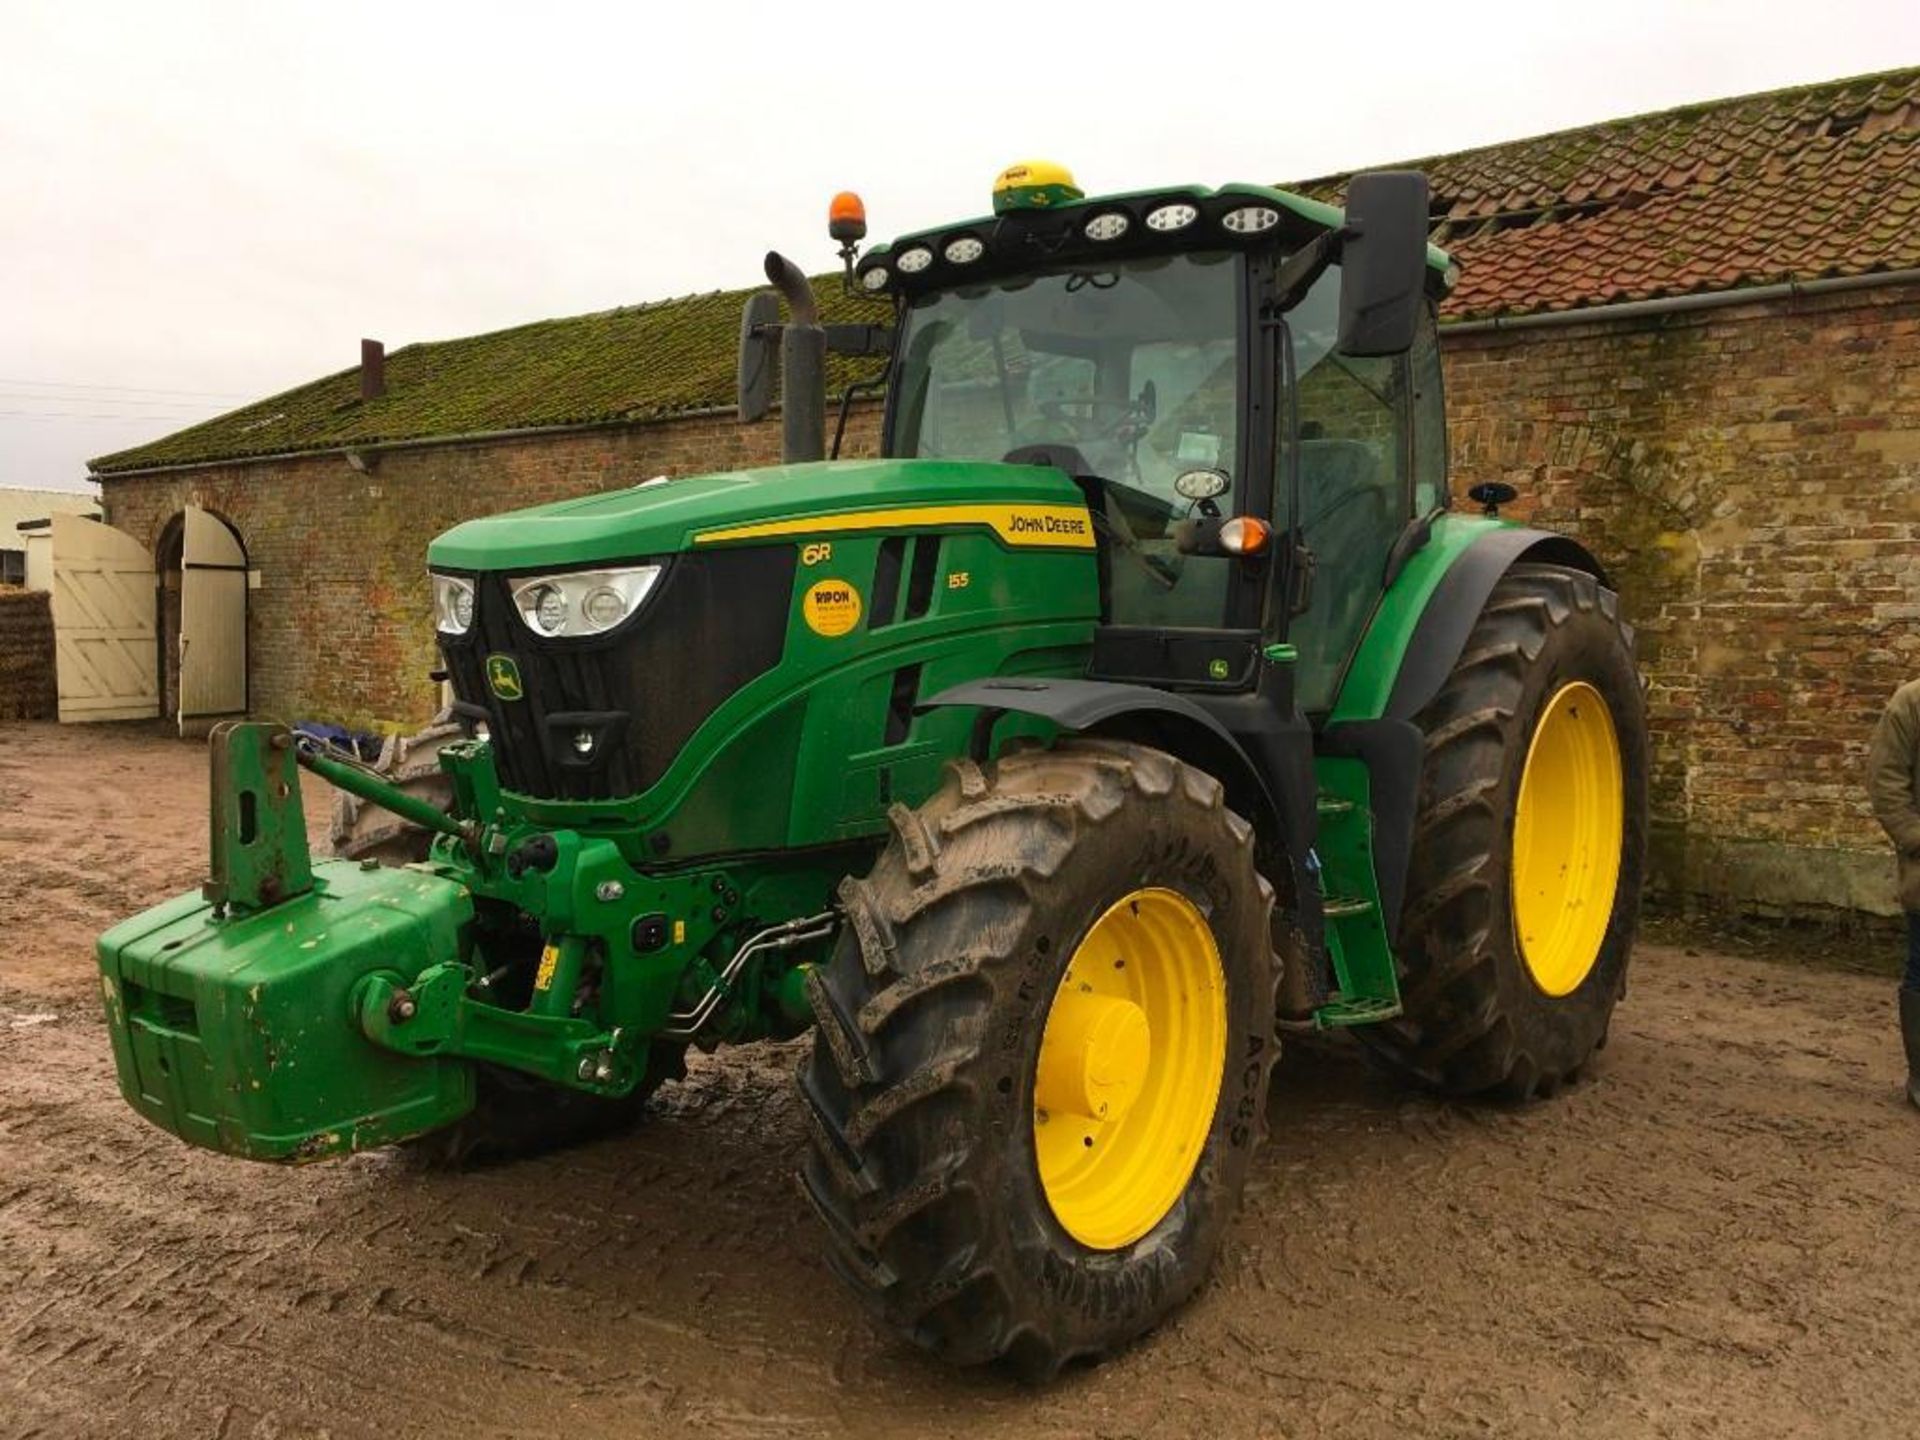 2022 John Deere 6R 155 Power Tech PVS tractor with Auto Power IVT transmission 50kph gearbox, 4WD fr - Image 5 of 14